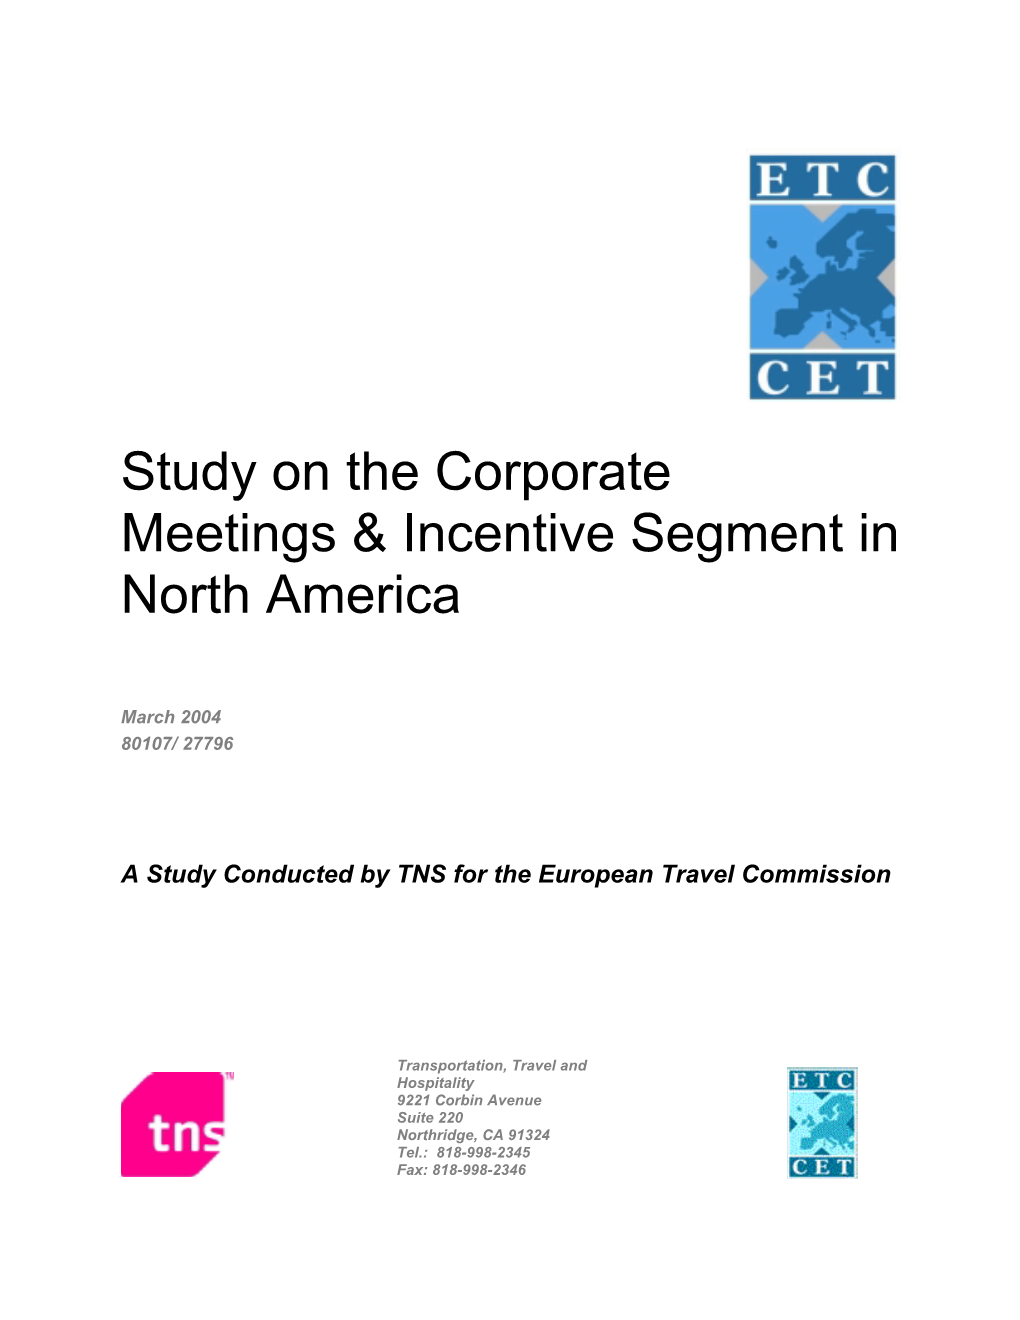 Study on the Corporate Meetings & Incentive Segment in North America